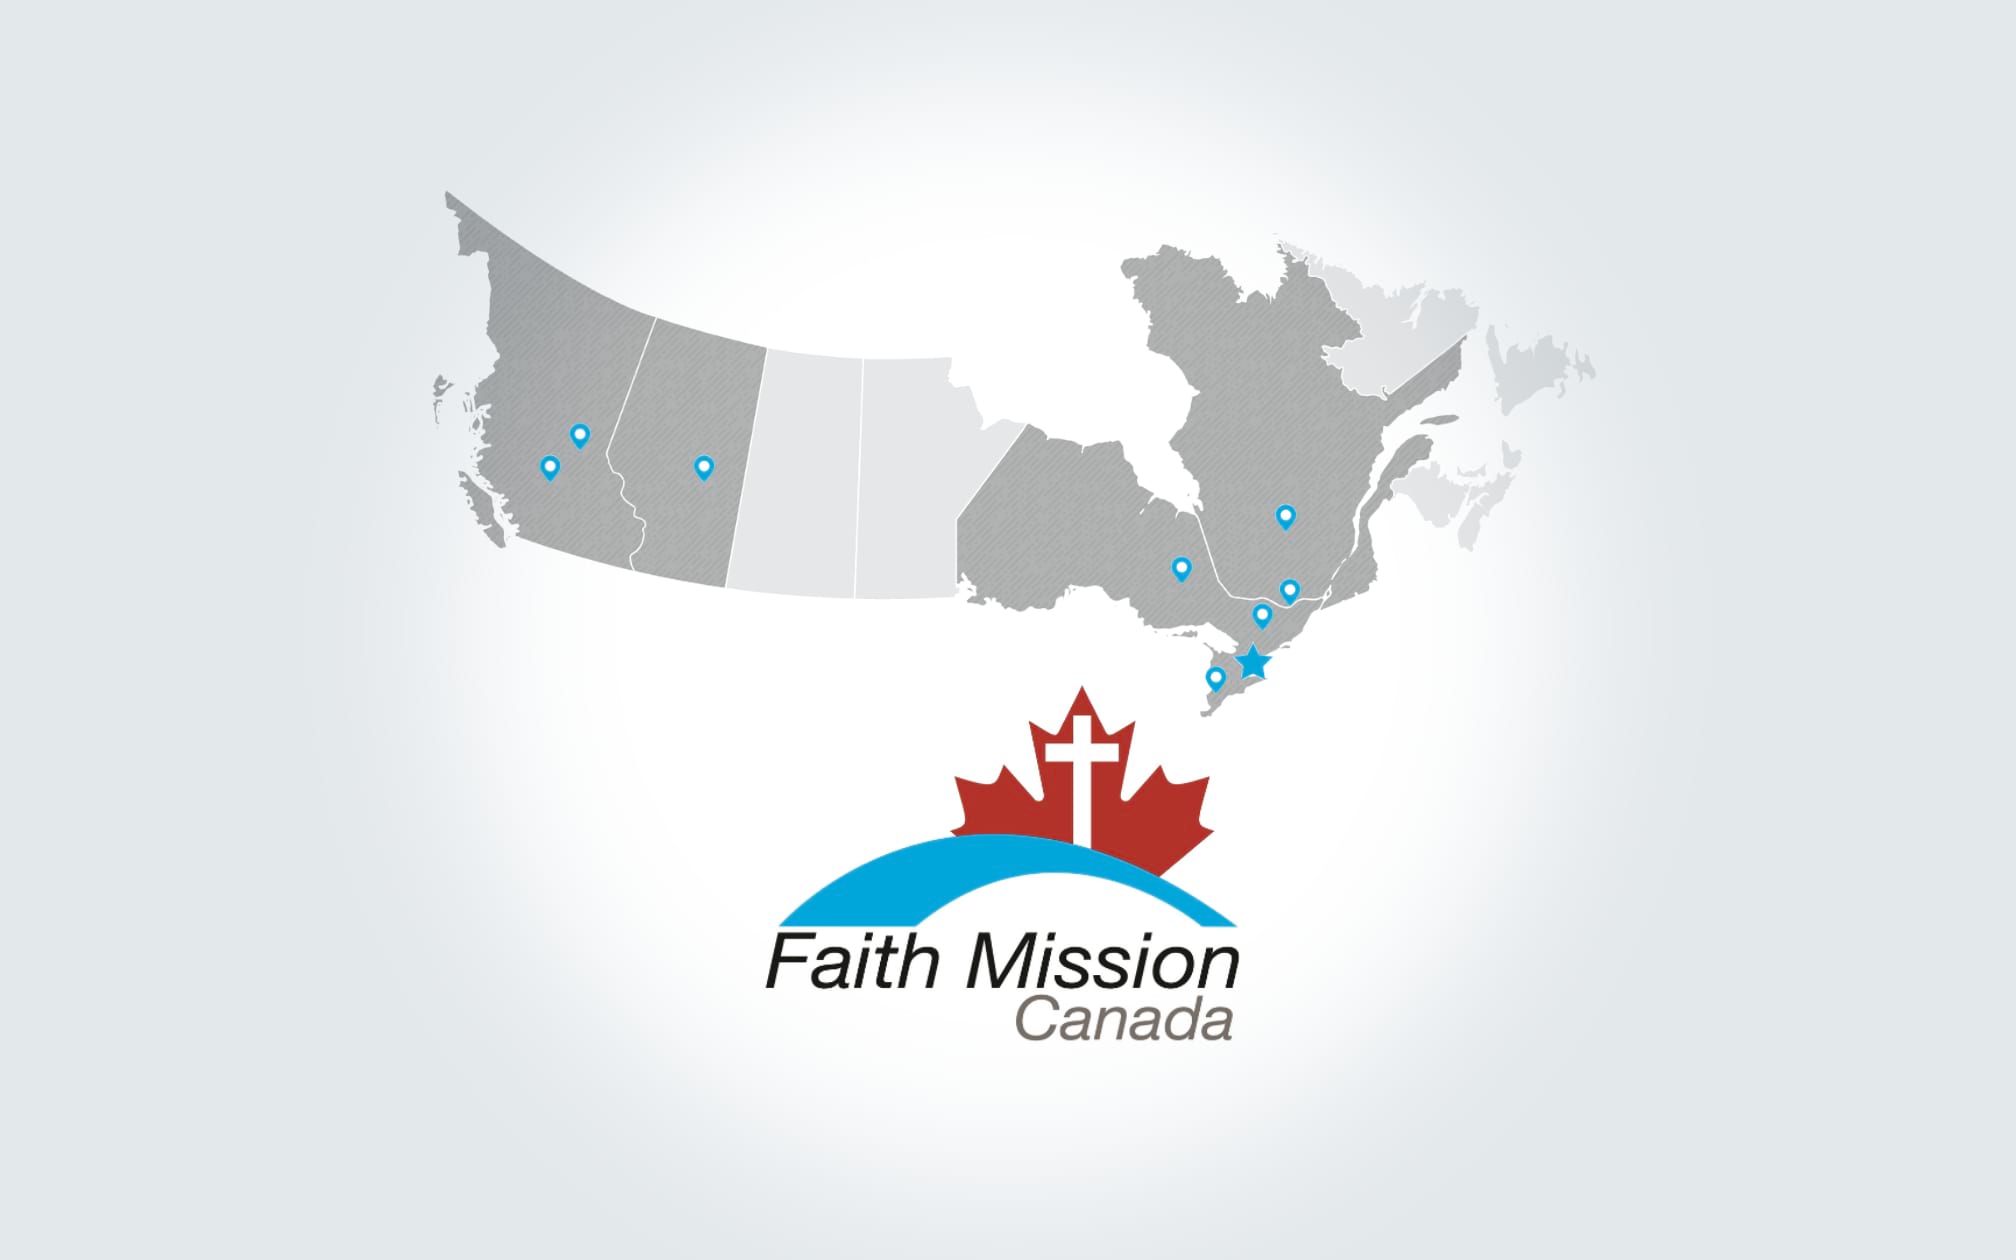 Faith Mission Canada reminds us that Canada is a mission field — There are multitudes who need to hear the Gospel of Jesus Christ.